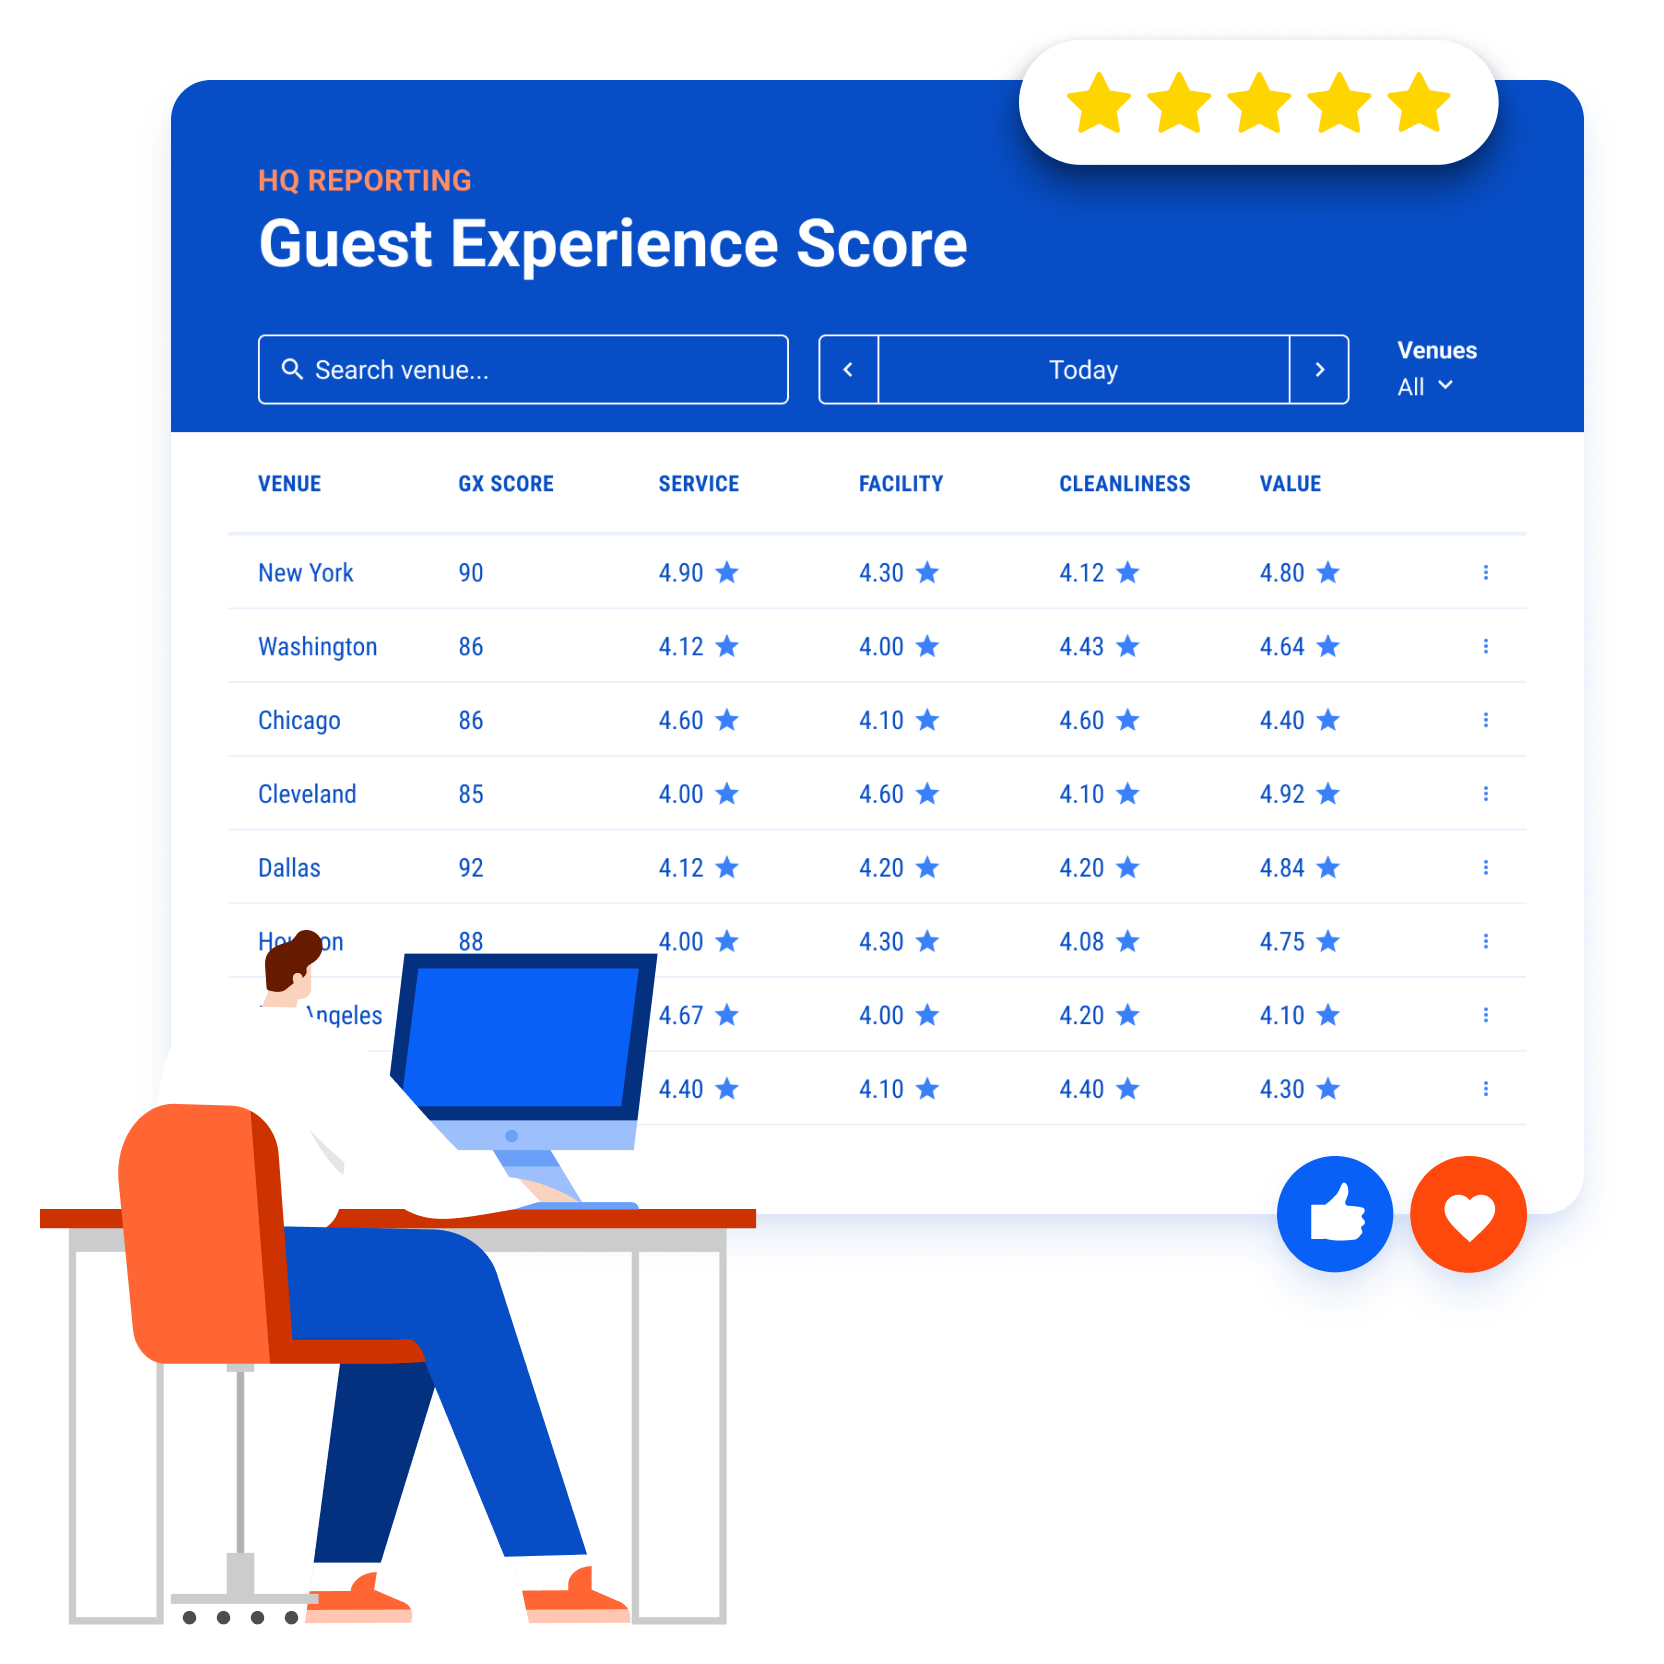 Guest experience performance in HQ report